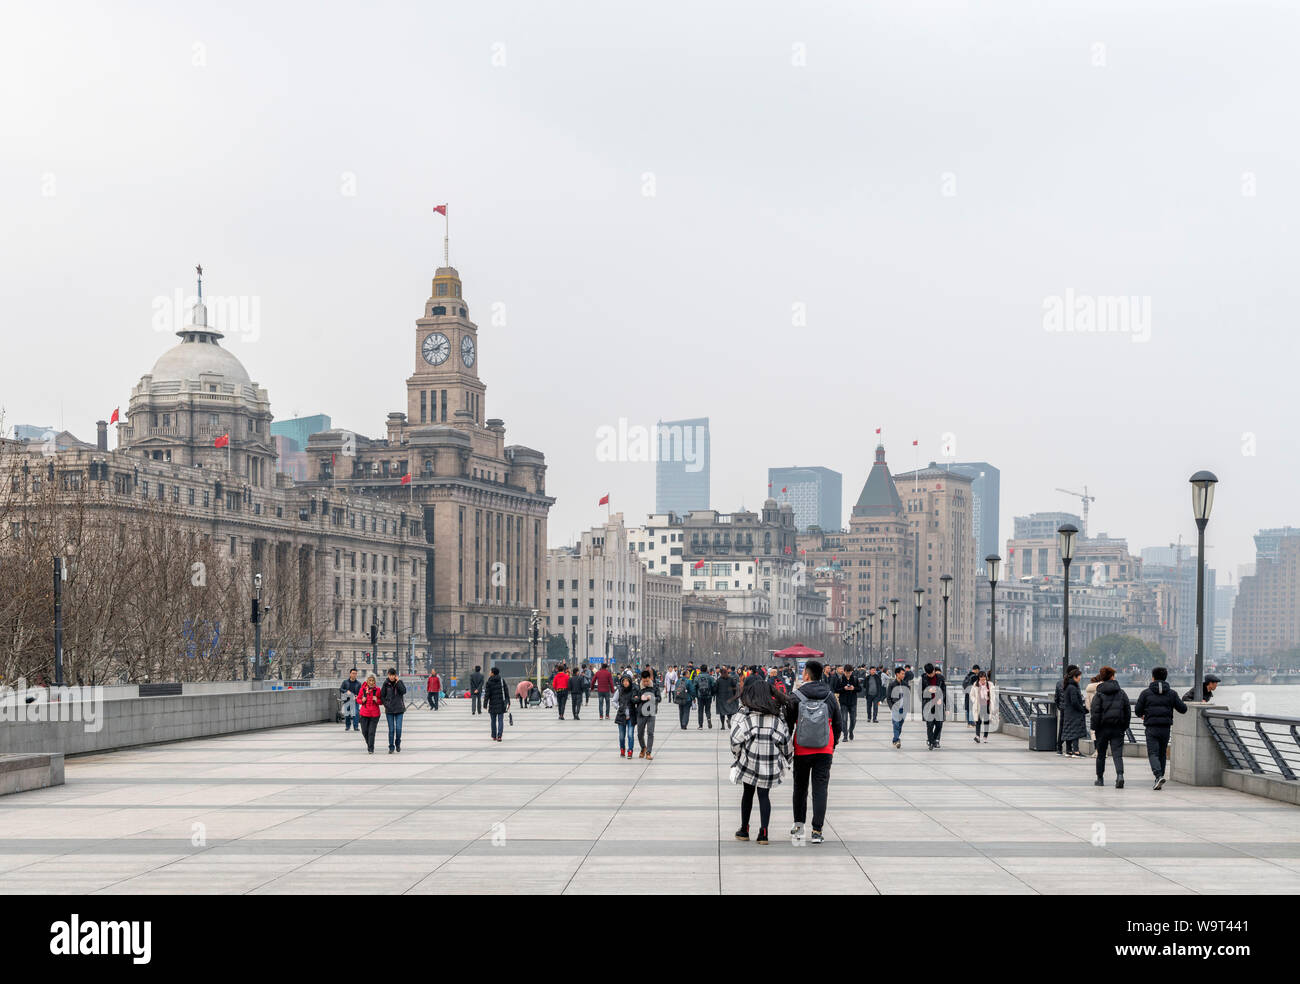 The Bund (Waitan), Huangpu River and Pudong skyline in early March 2019 when the AQI (Air Quality Index) was over 200, Shanghai, China Stock Photo